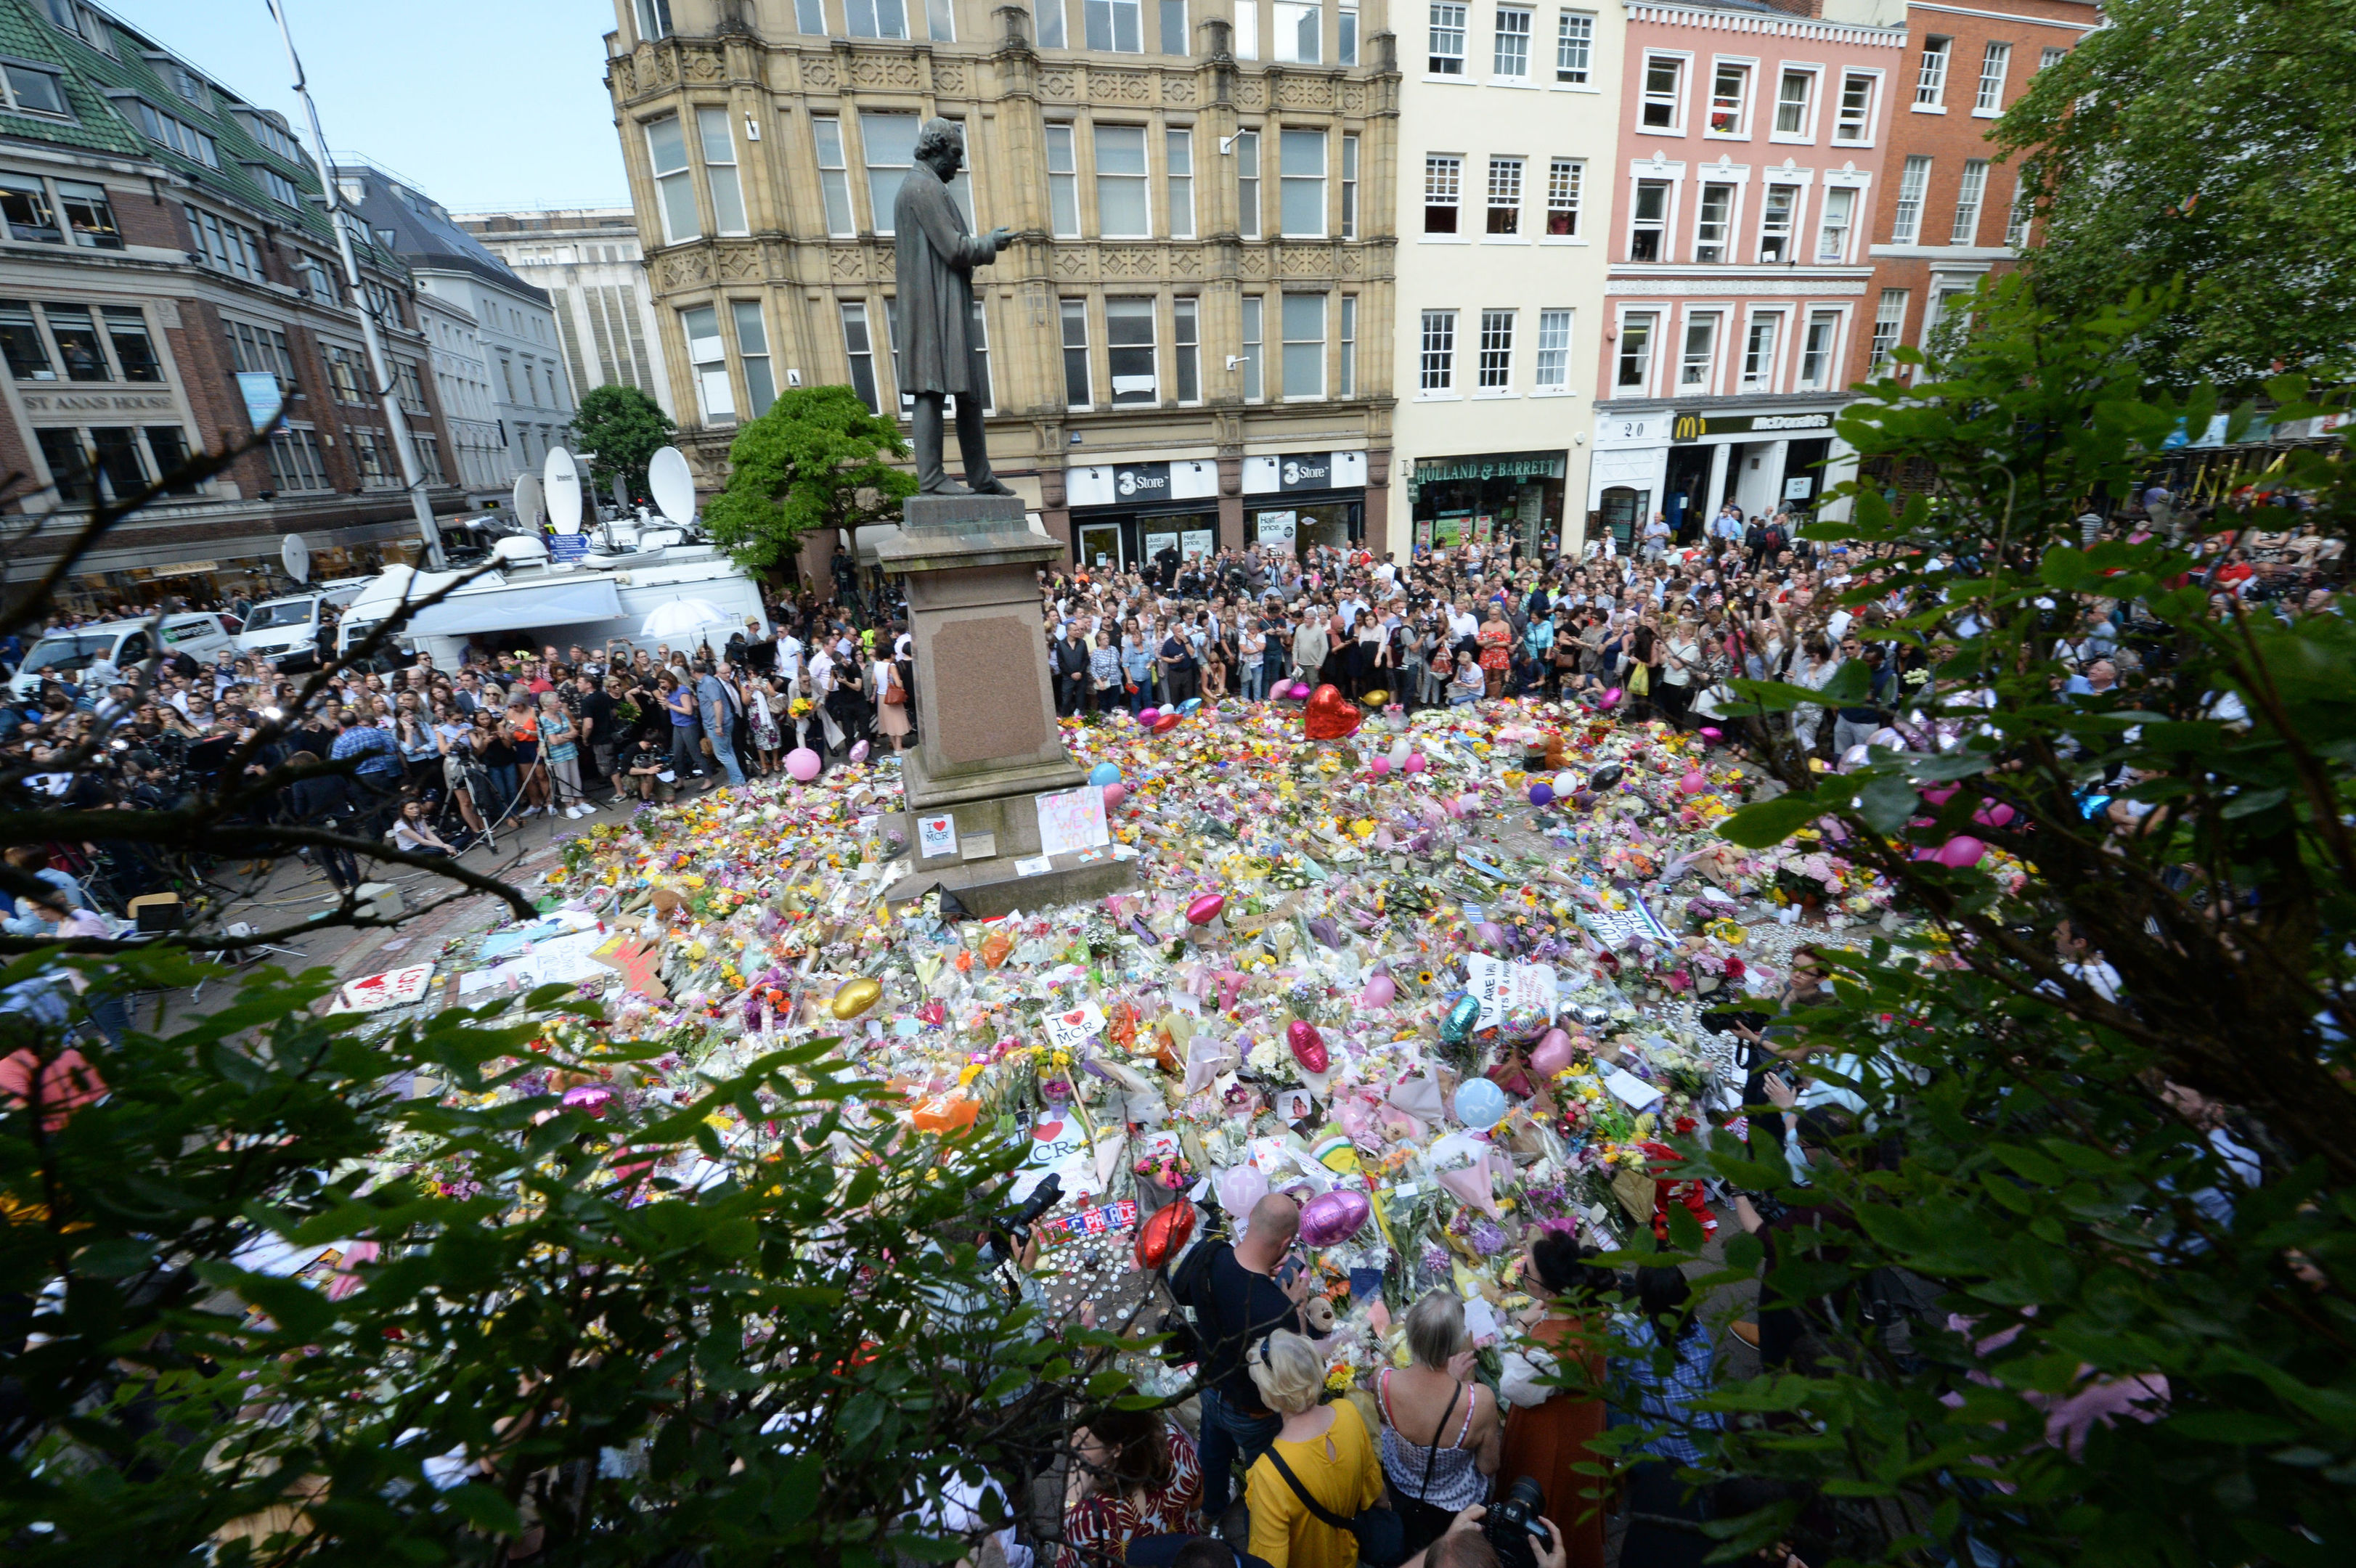 A minute's silence is held in St Ann's Square, Manchester.